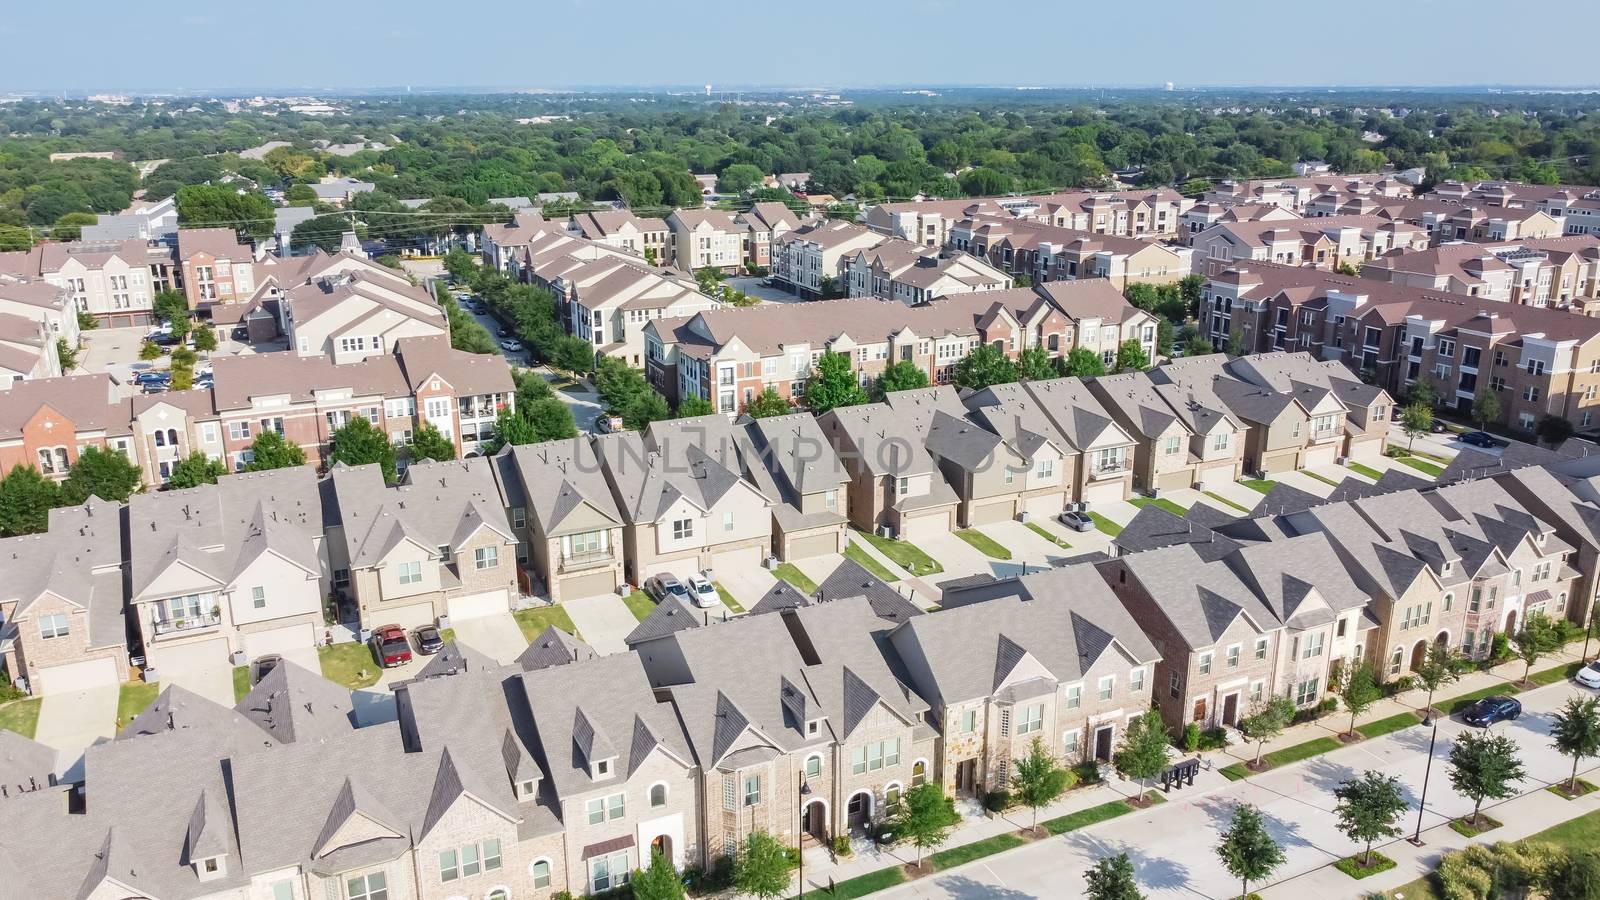 Aerial view of brand new two story condo and townhomes in downtown Flower Mound, Texas, America. Master-planned community and census-designated residential houses and apartment buildings